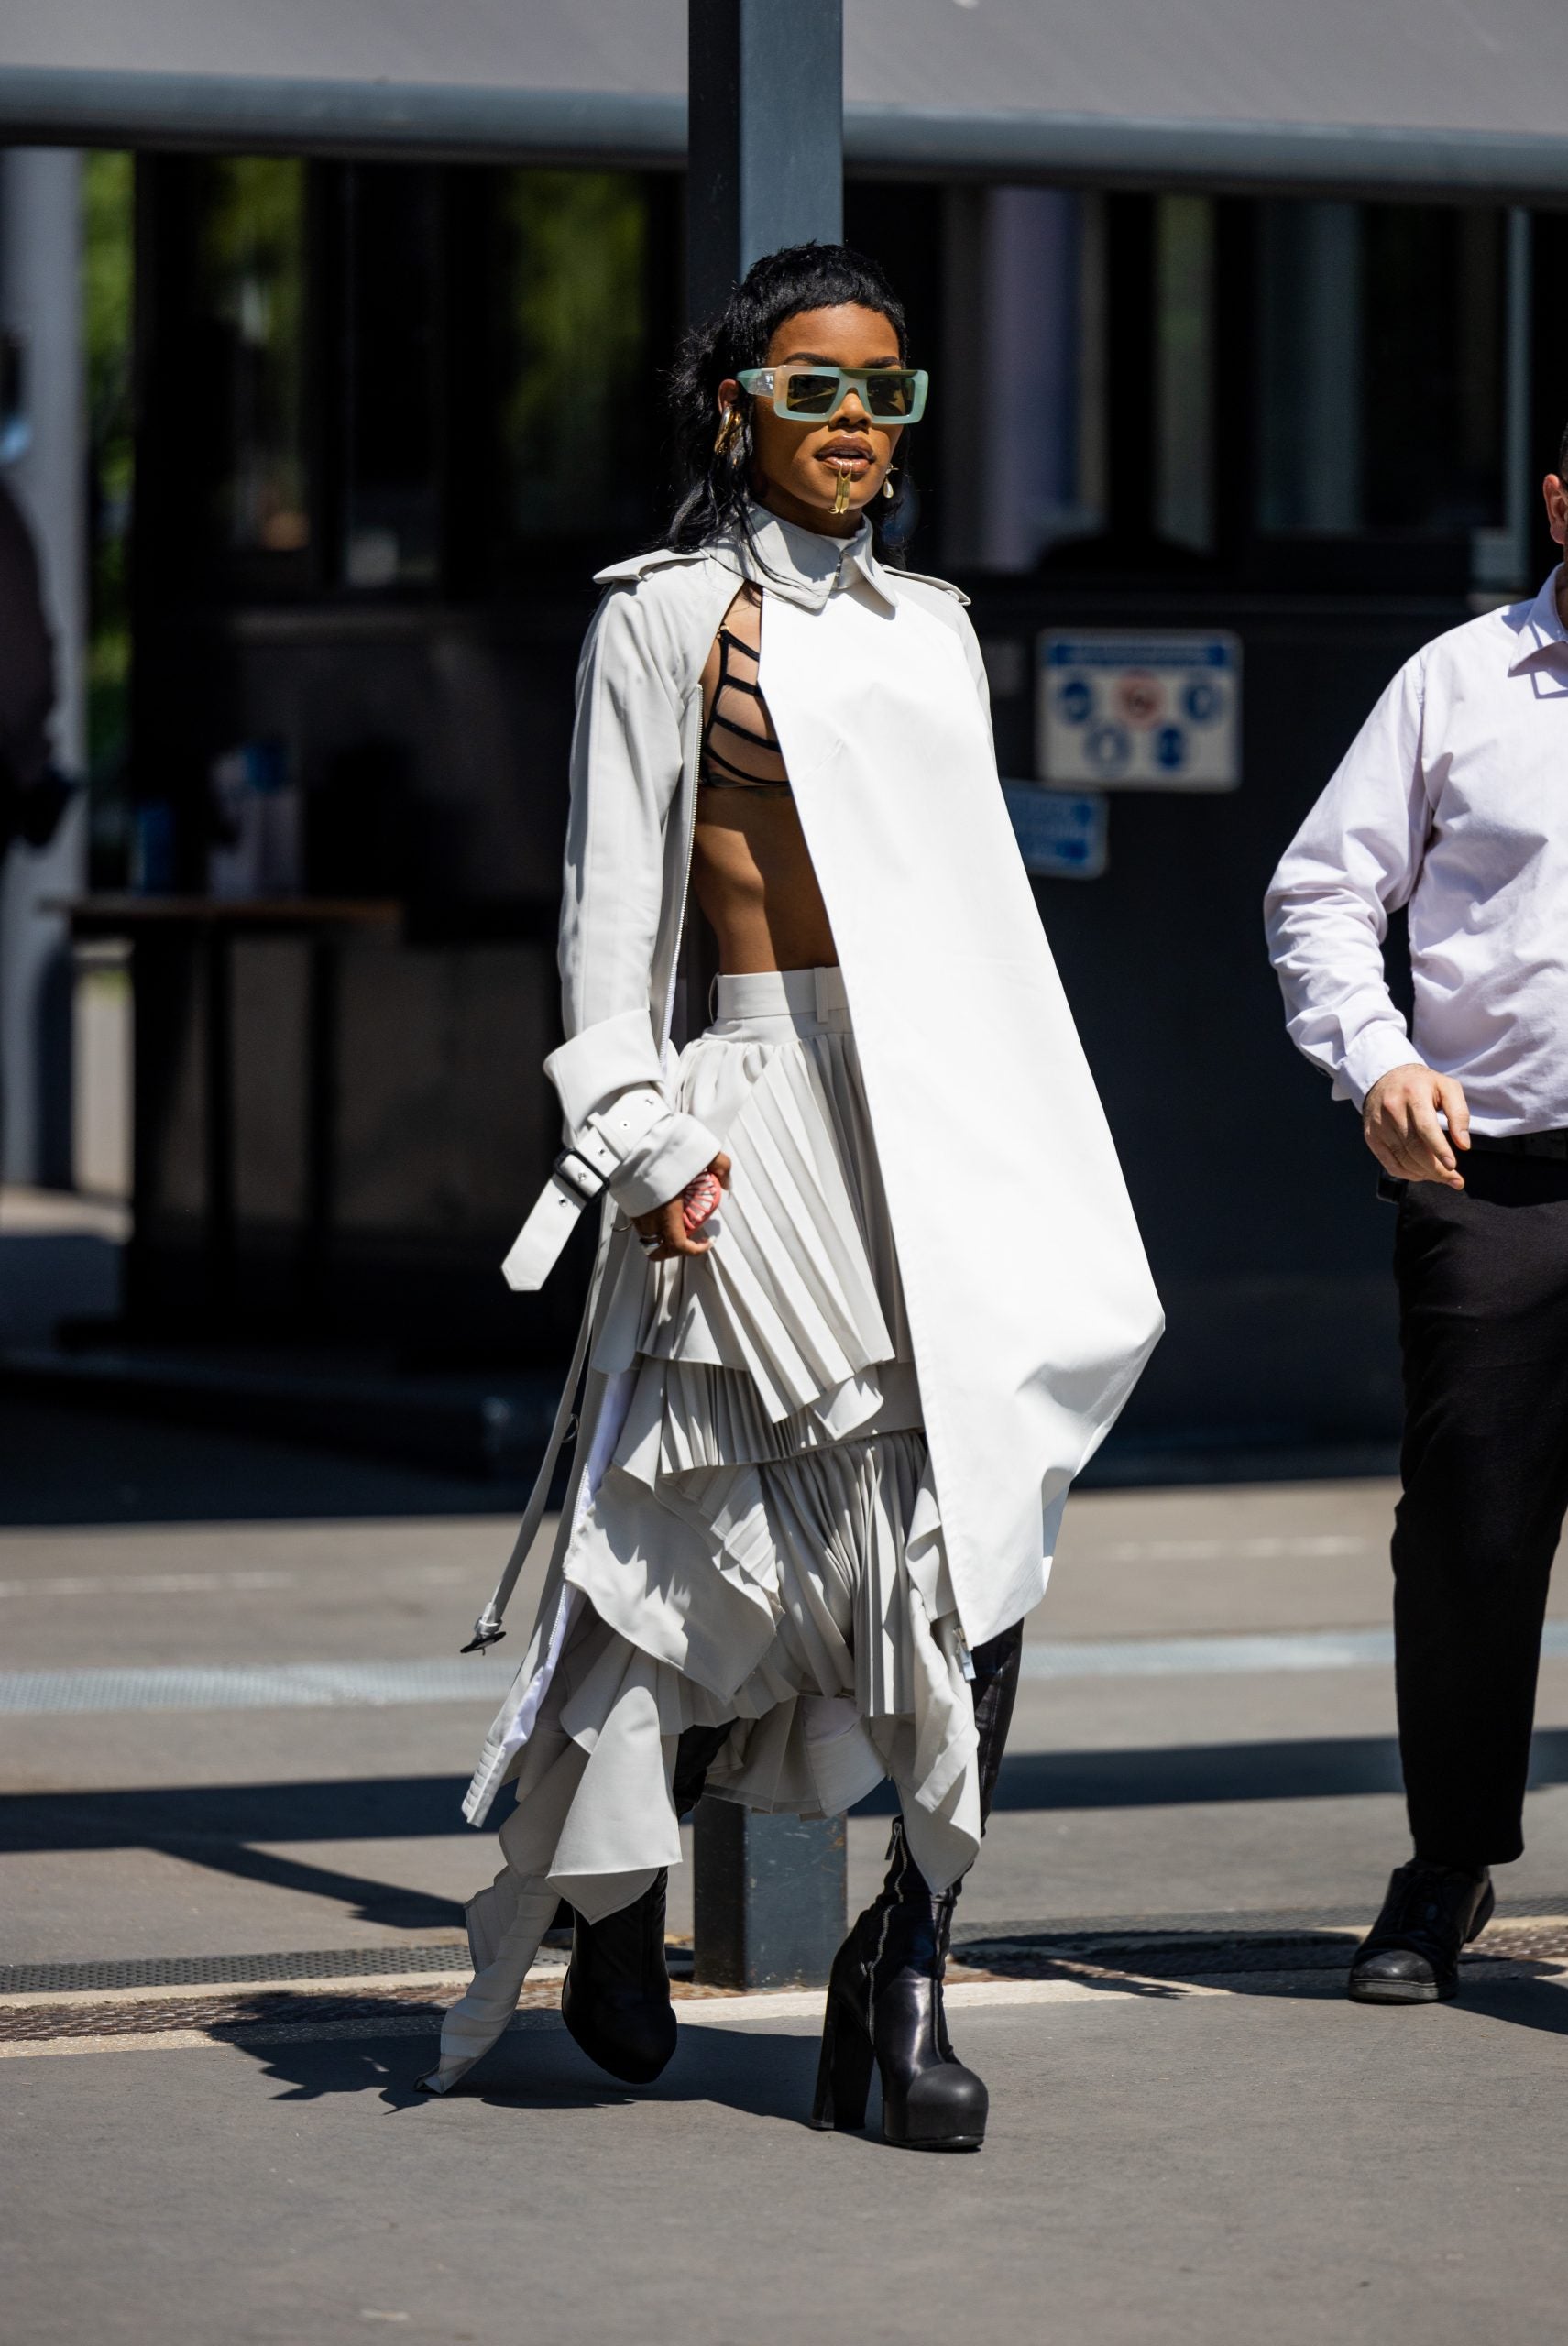 Paris Fashion Week 2023 street style: How to shop the looks